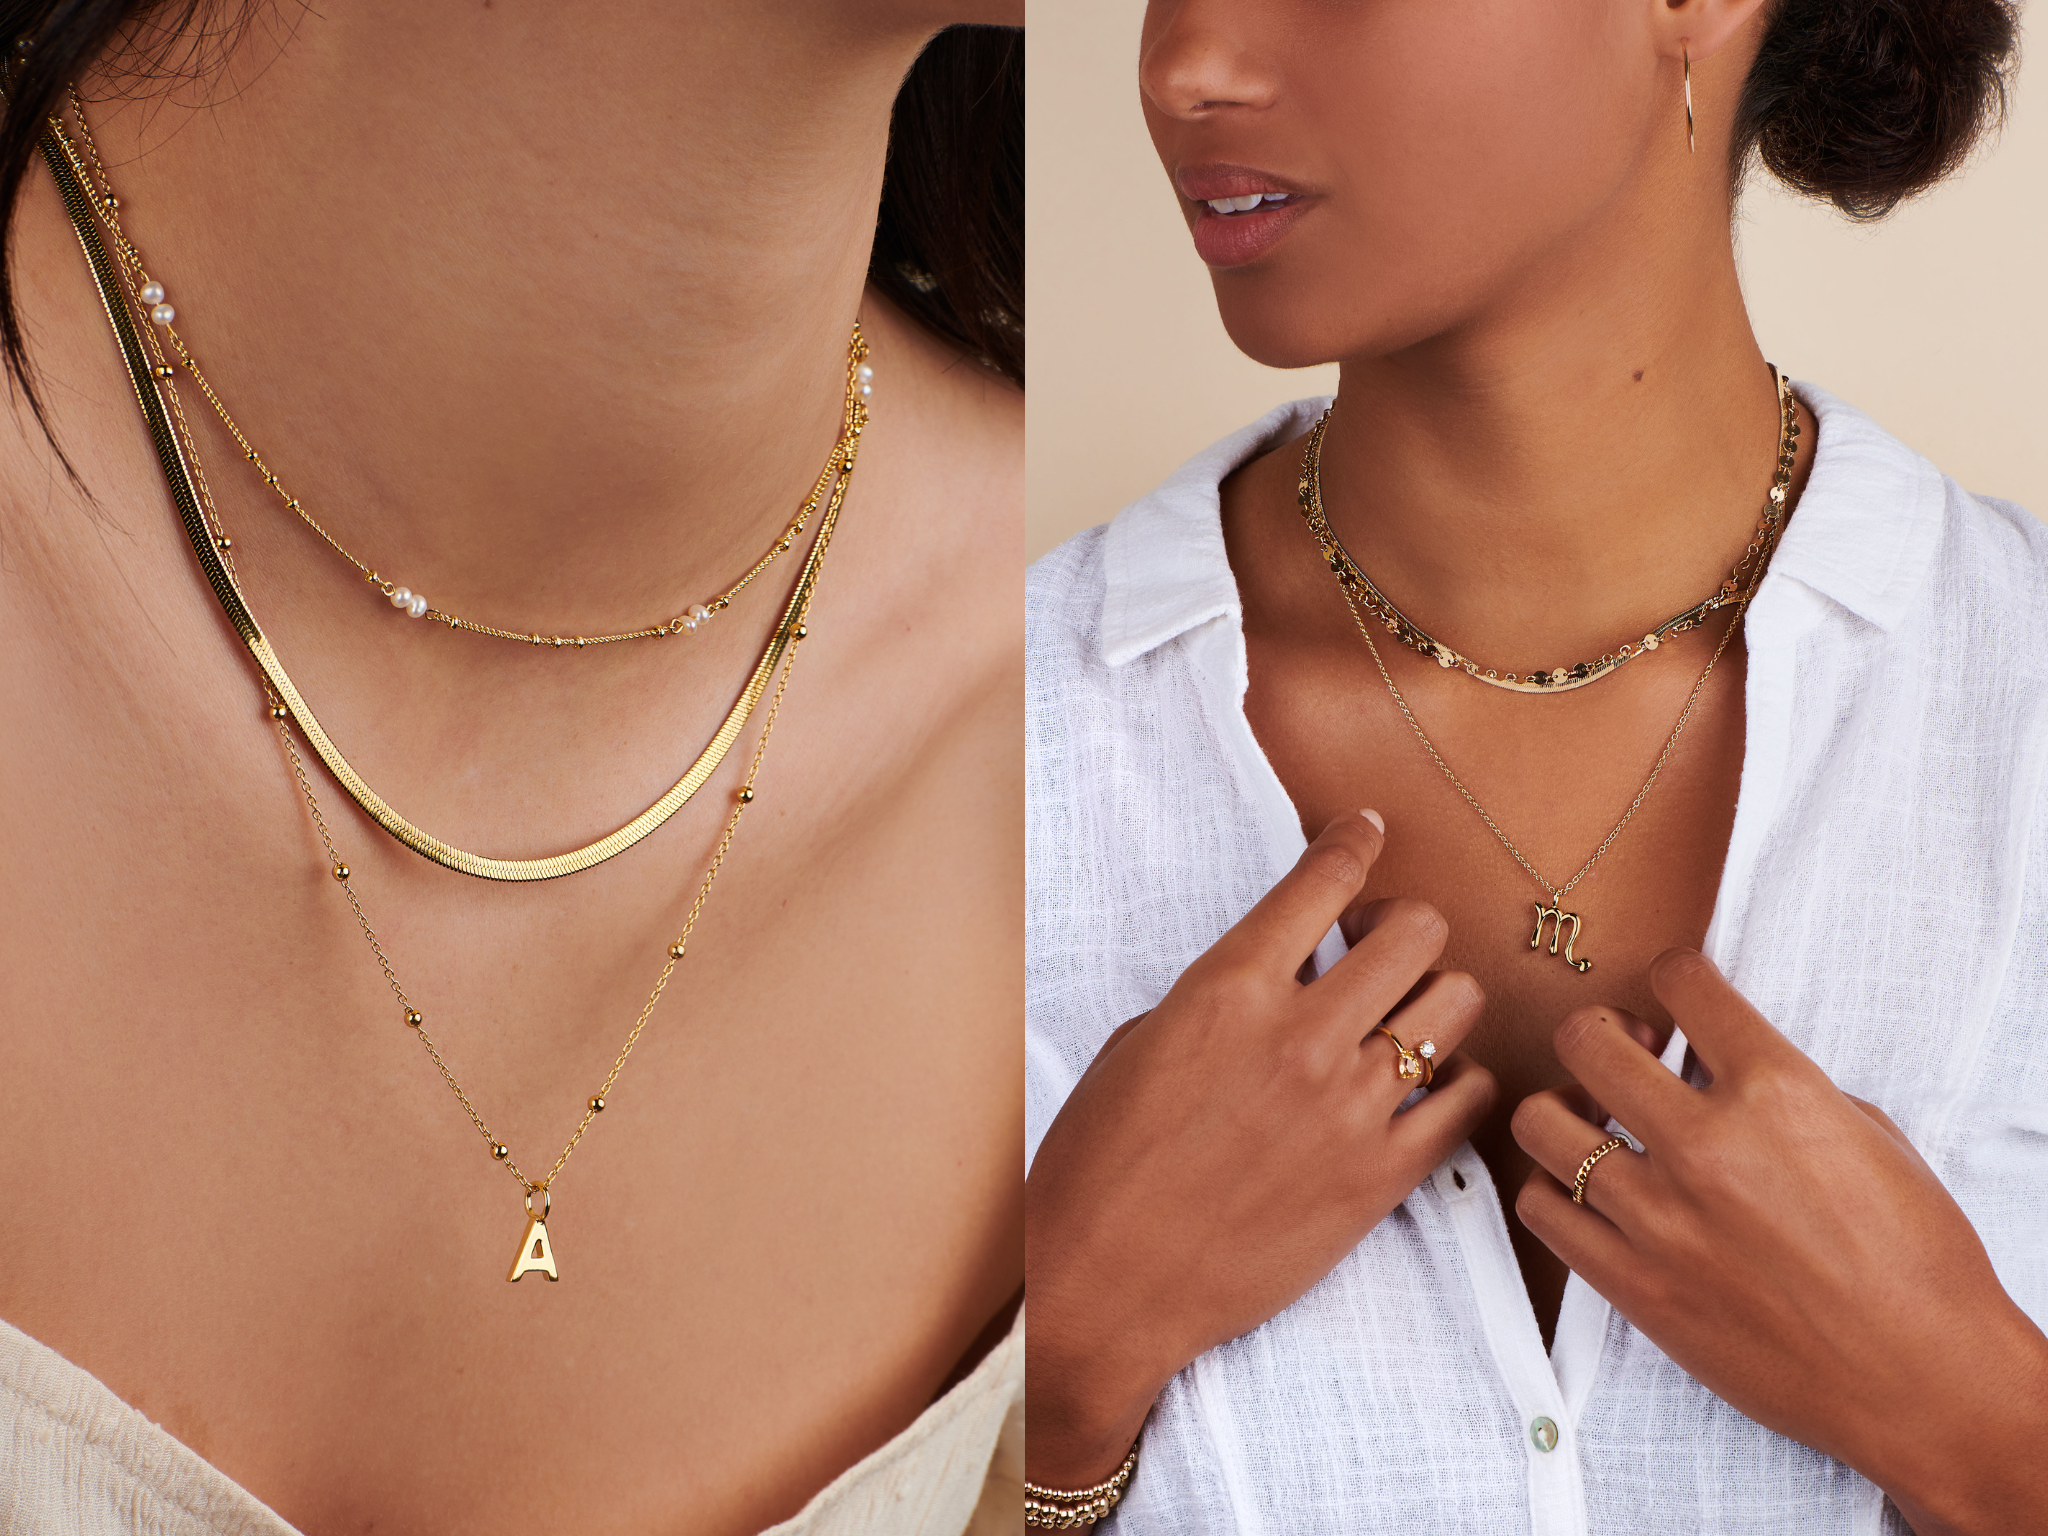 The Art of Layering Necklaces Like a Pro